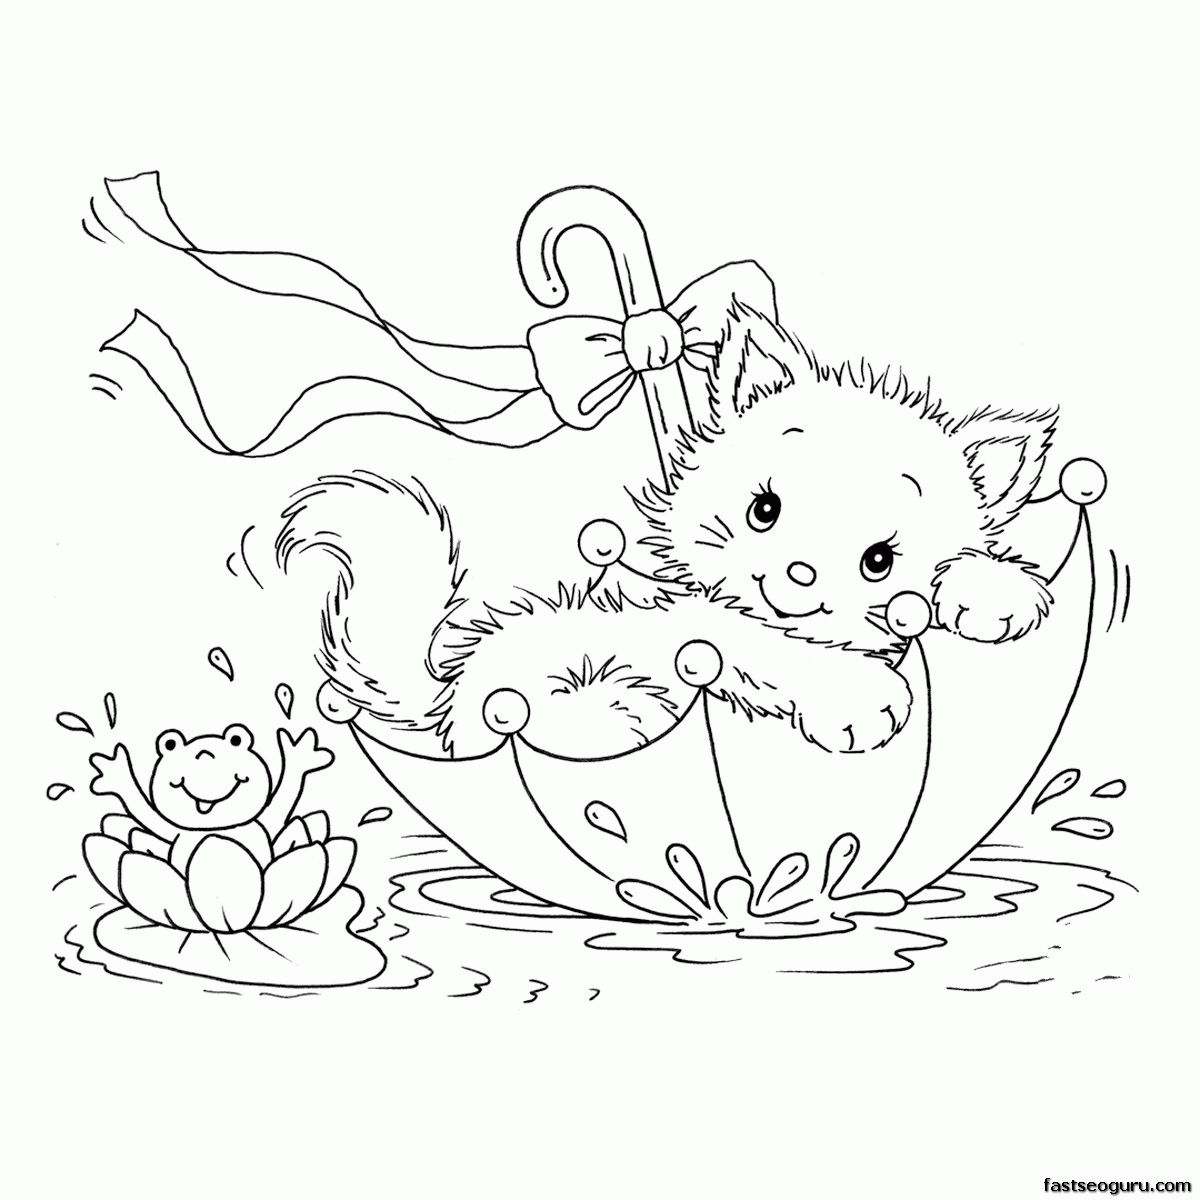 Cat And Kitten Coloring Pages For Kids Printable - VoteForVerde.com